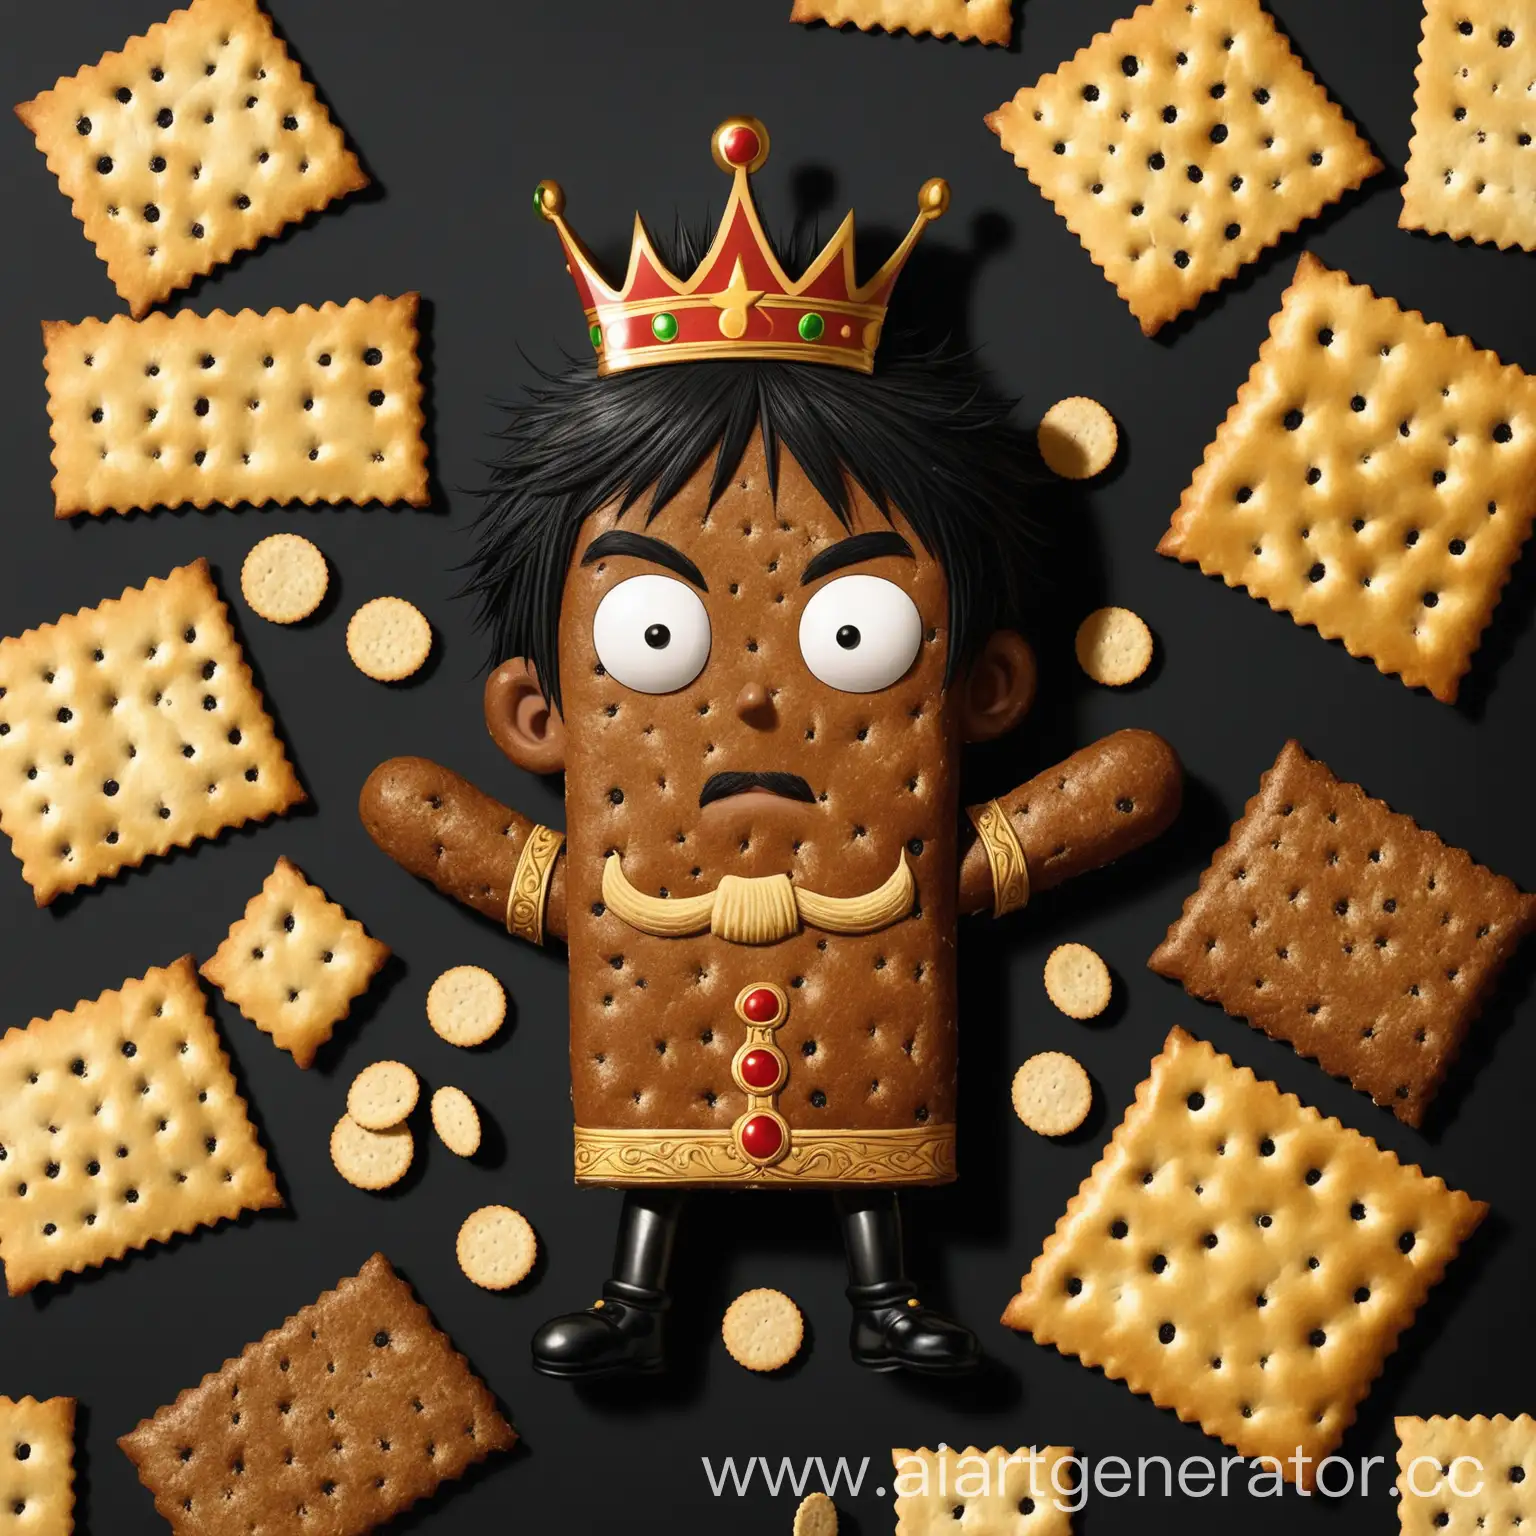 Rugged-Man-with-Black-Hair-King-of-Crackers